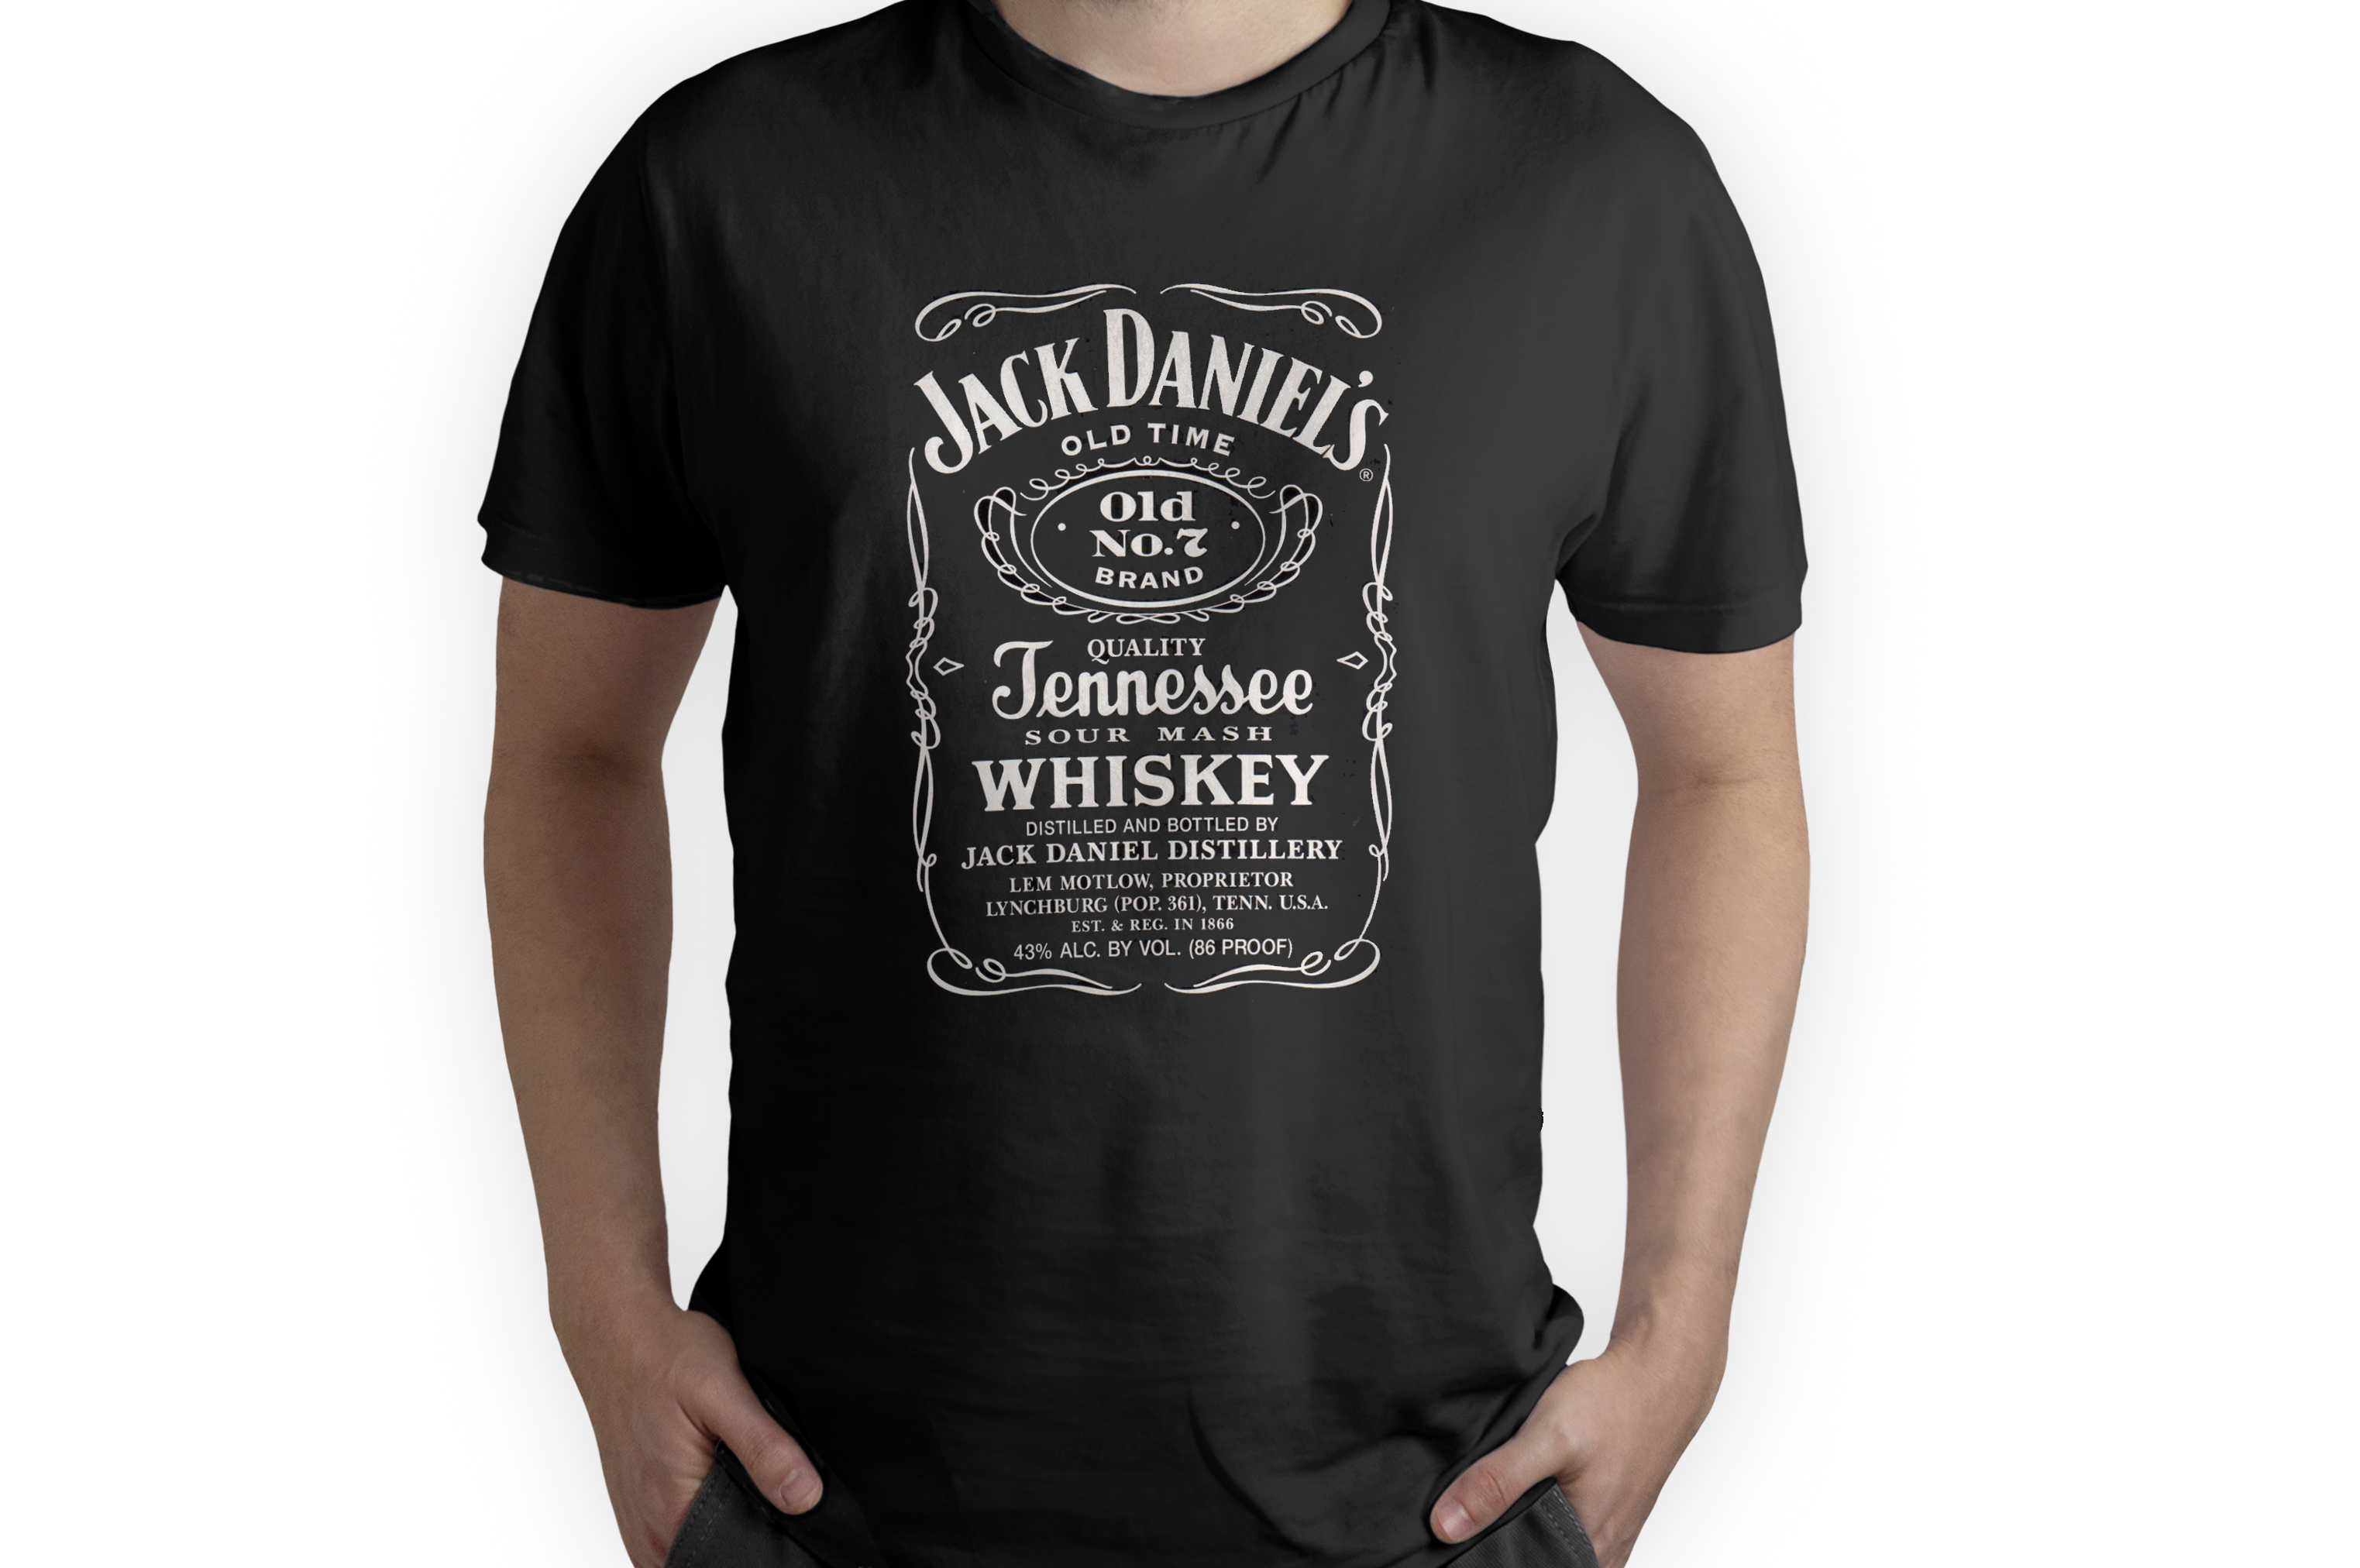 Jack Daniels Tennessee Sour Mash Whiskey Shirt Plus Size Up To 5xl | Trending Shirts